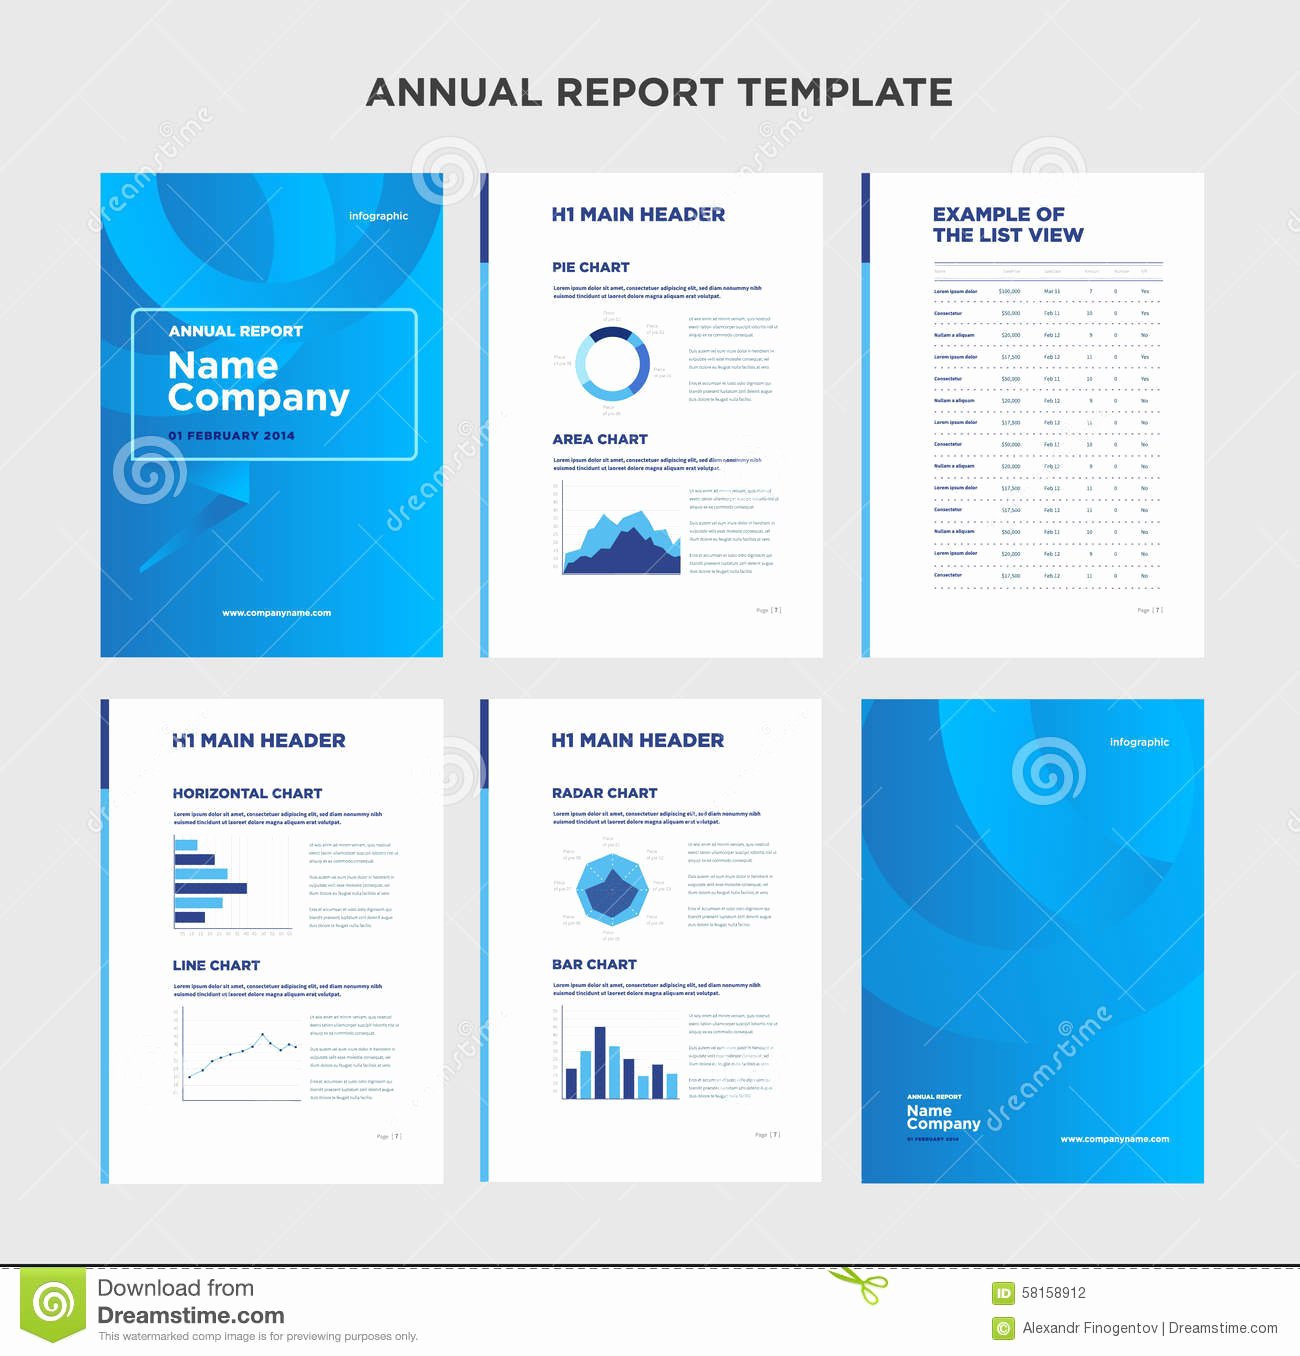 Annual Report Design Template Elegant Annual Report Template with Cover Design and Infographic